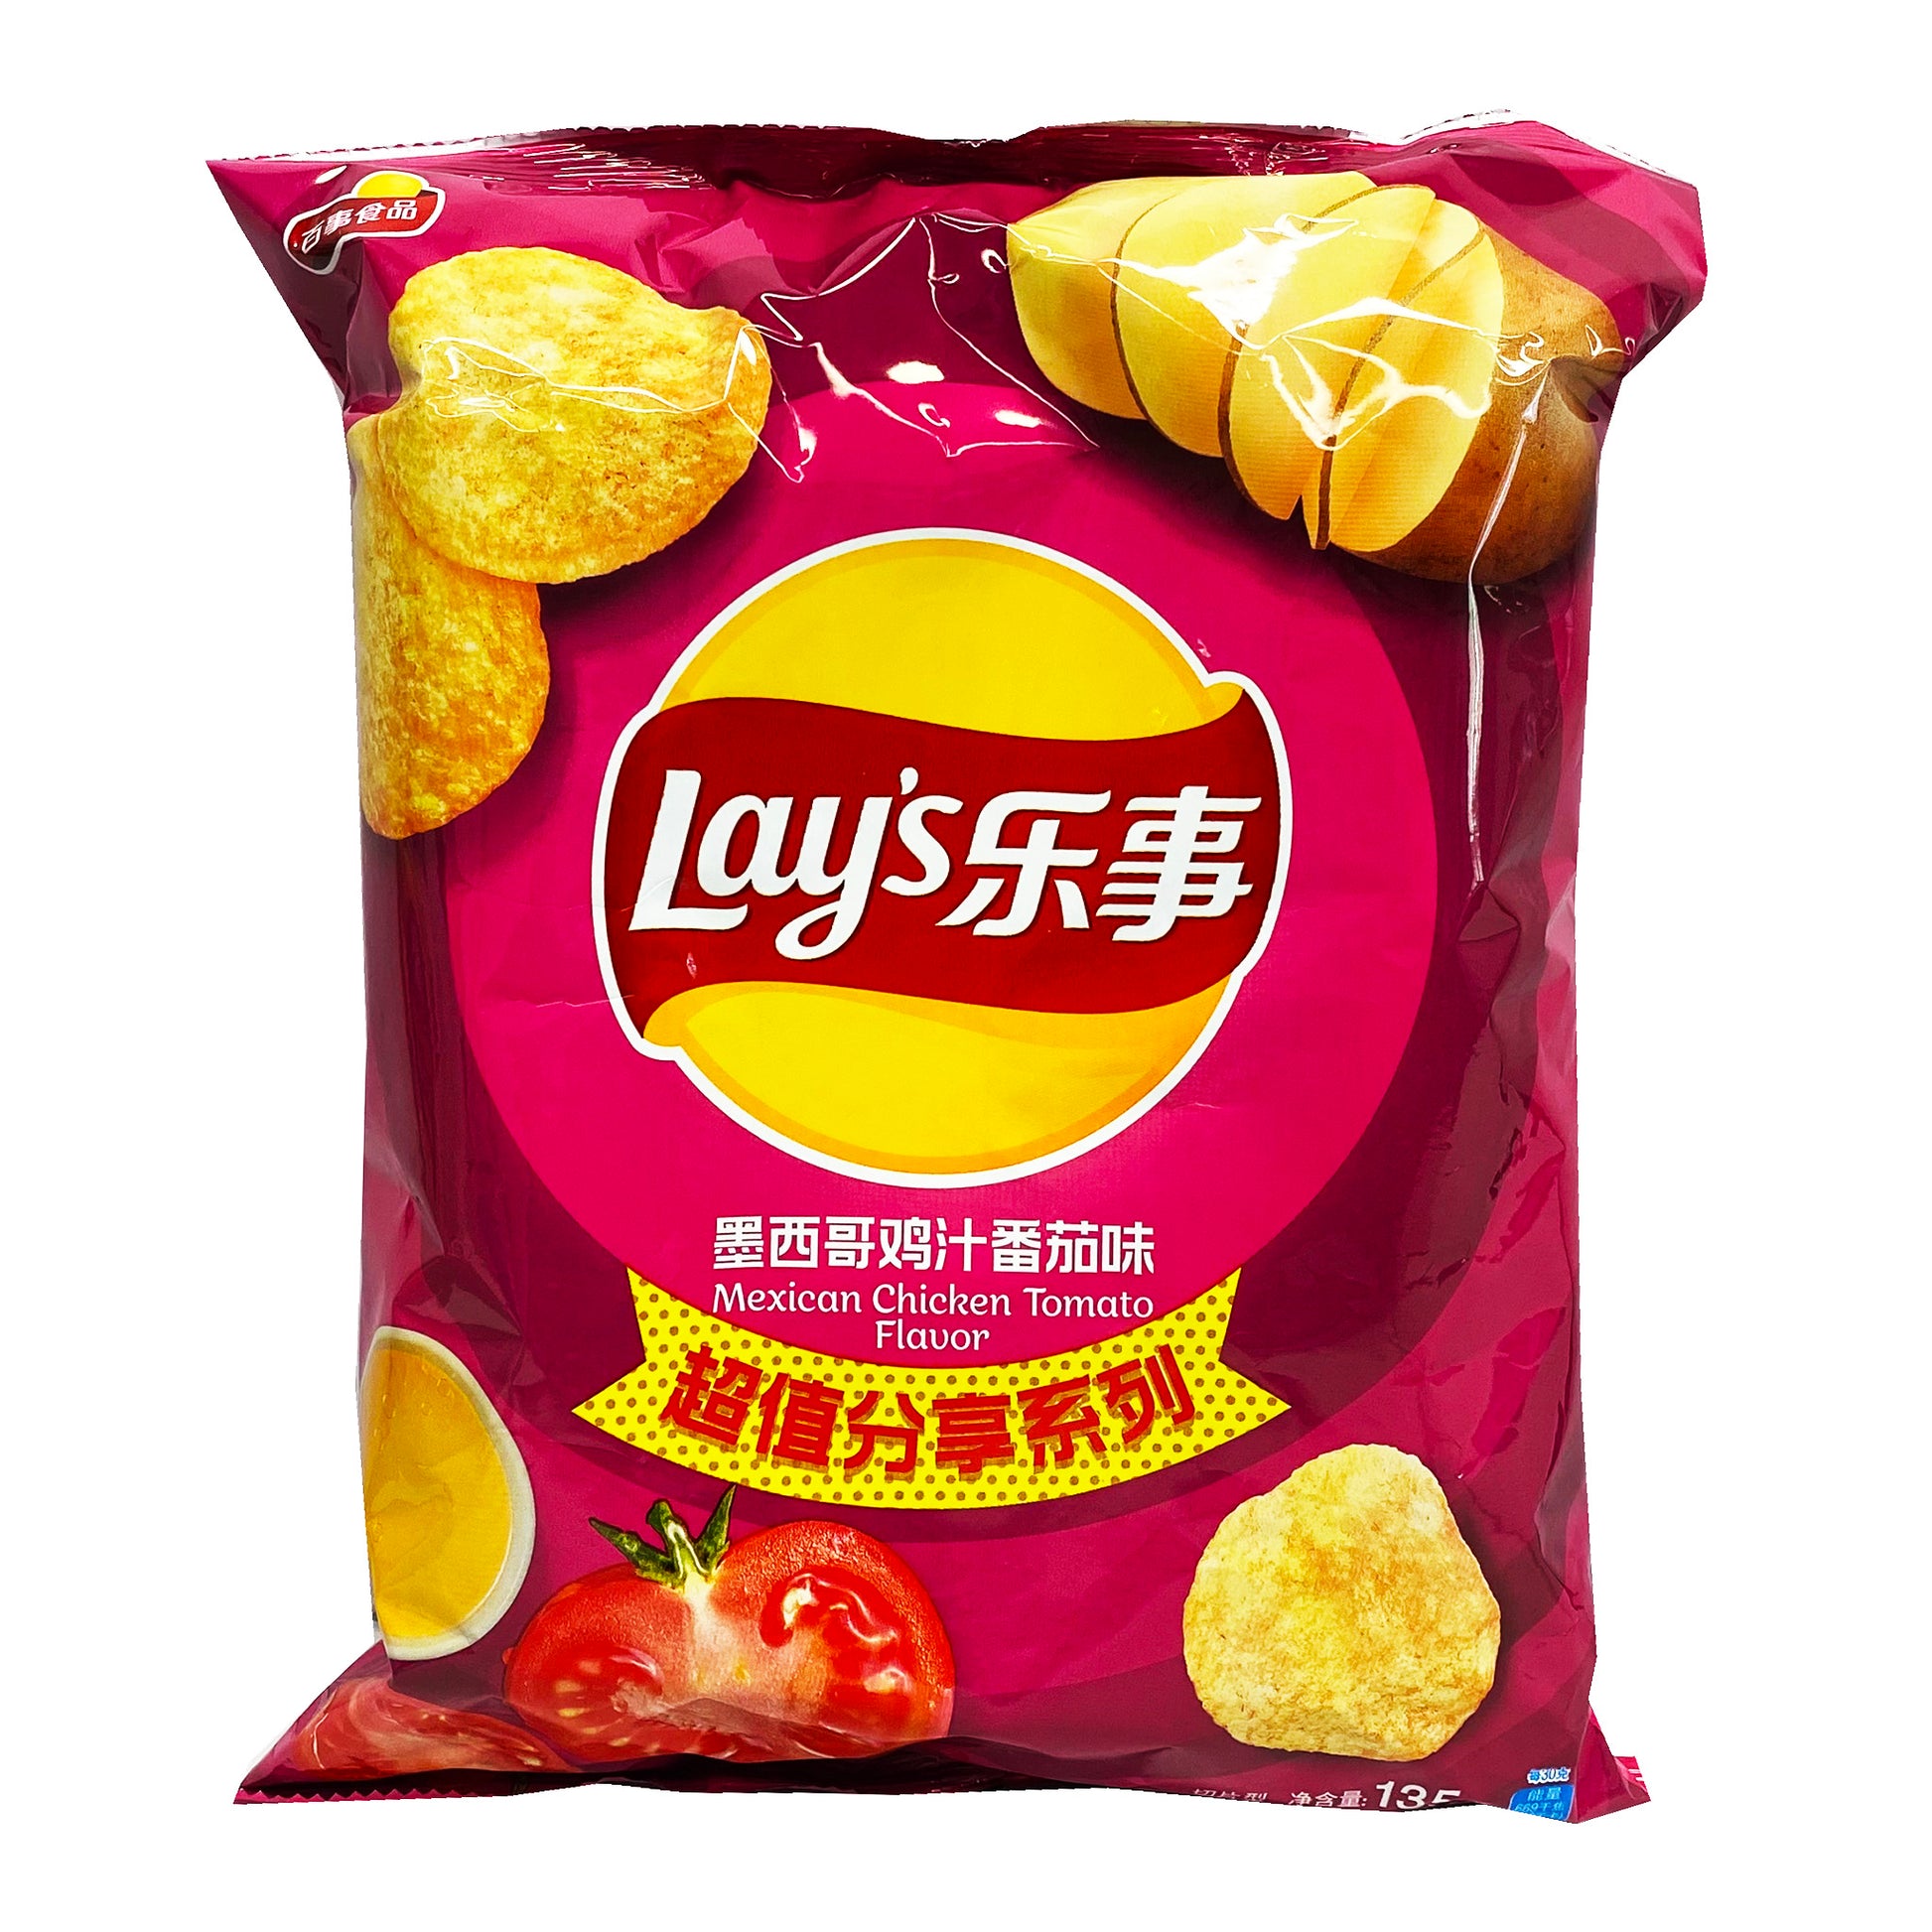 Front graphic image of Lay's Potato Chips - Mexican Chicken Tomato Flavor 4.76oz (135g) - 乐事薯片 - 墨西哥鸡汁蕃茄味 4.76oz (135g)